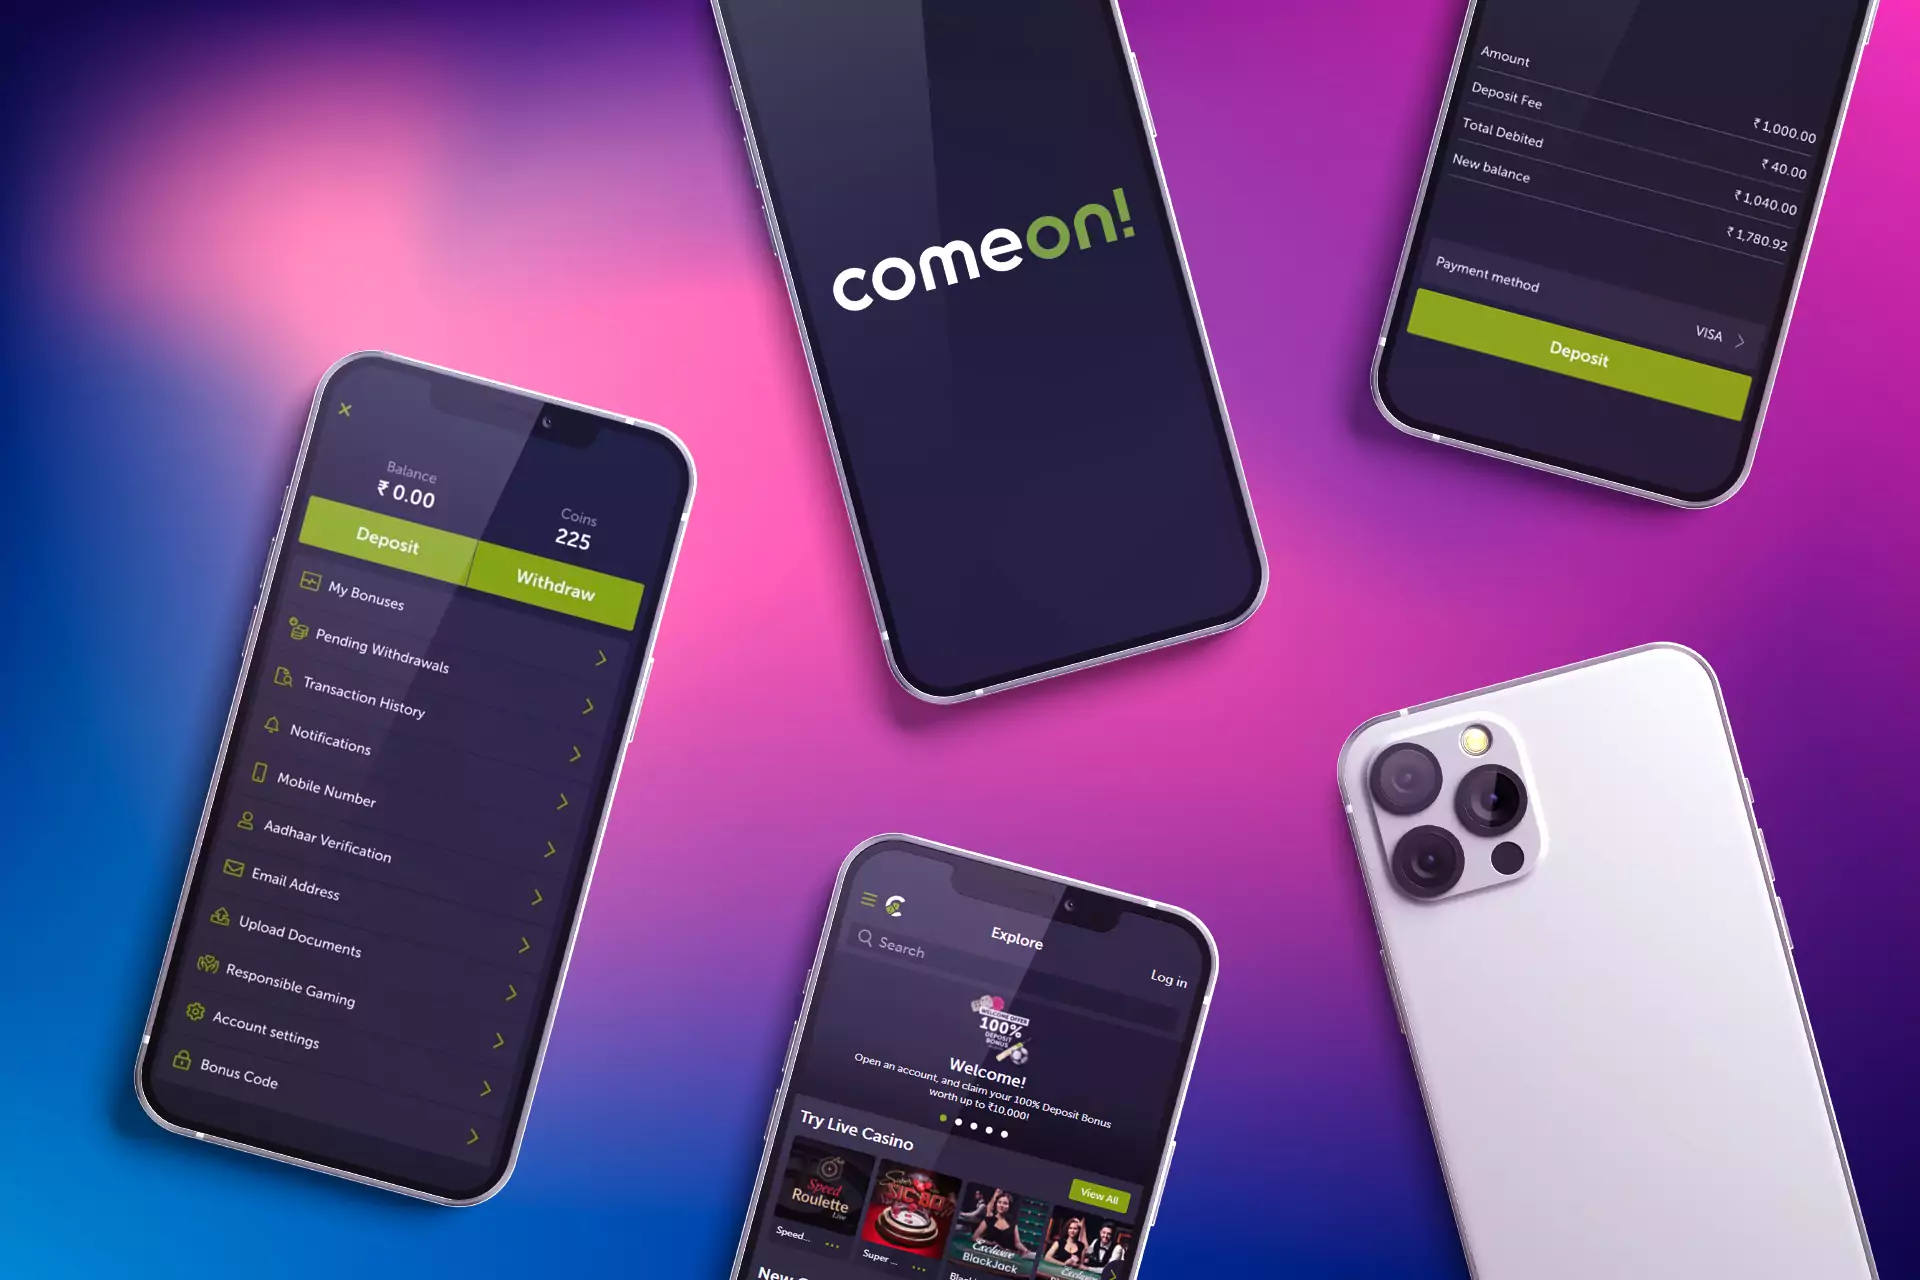 After you open an account at Comeon, make the first deposit in the cashier.